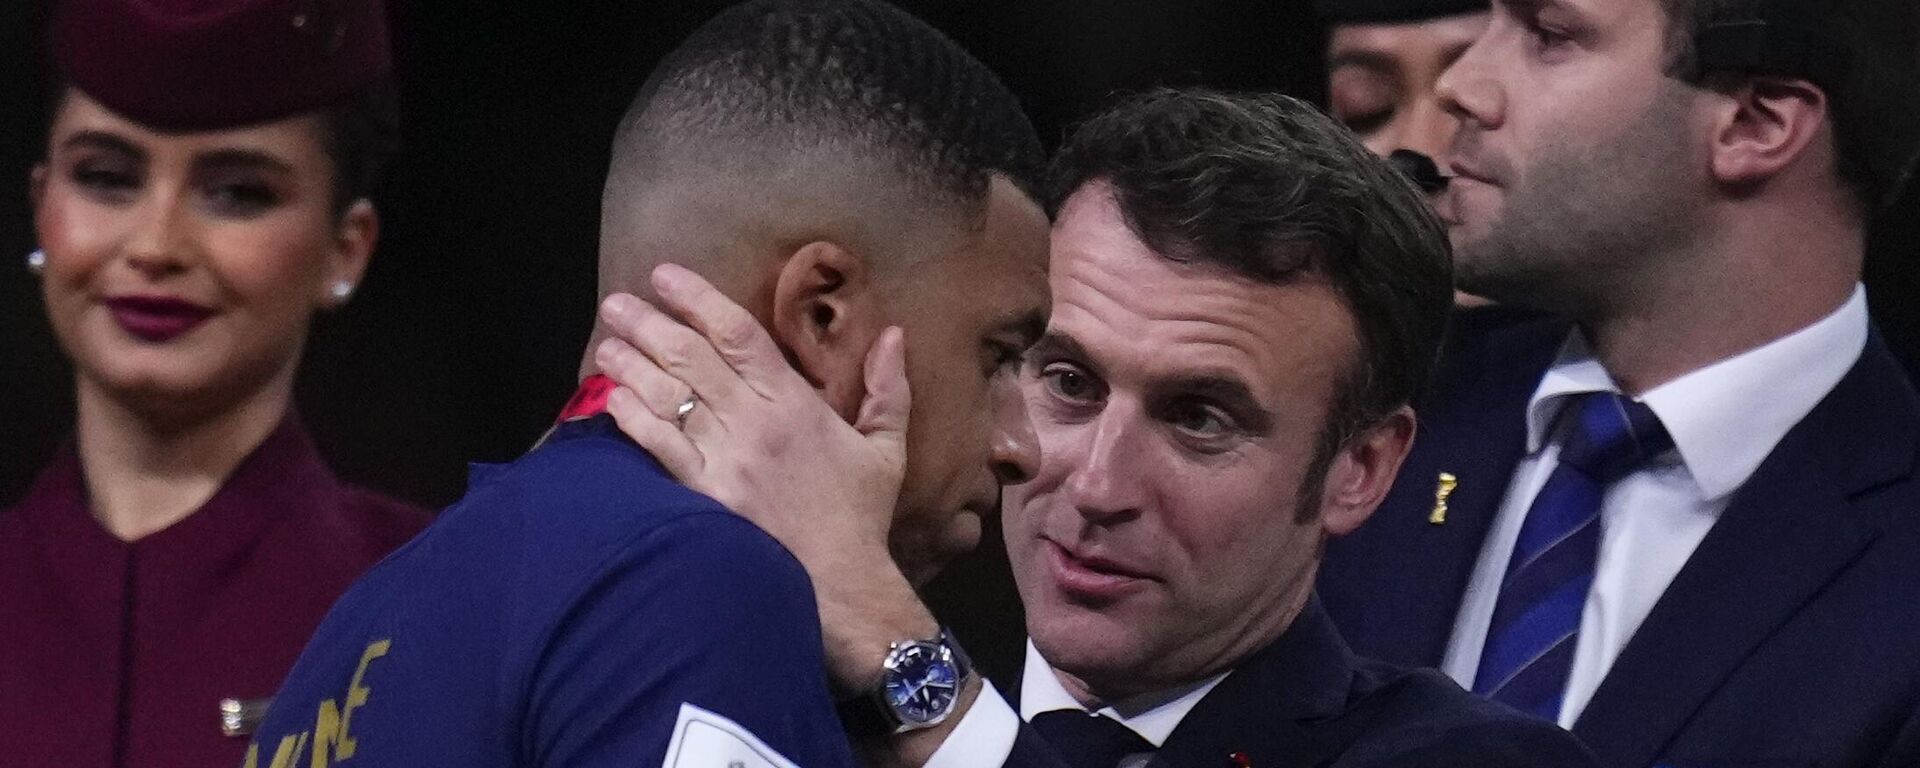 France's Kylian Mbappe is consoled by French President Emmanuel Macron after the World Cup final - Sputnik International, 1920, 19.12.2022